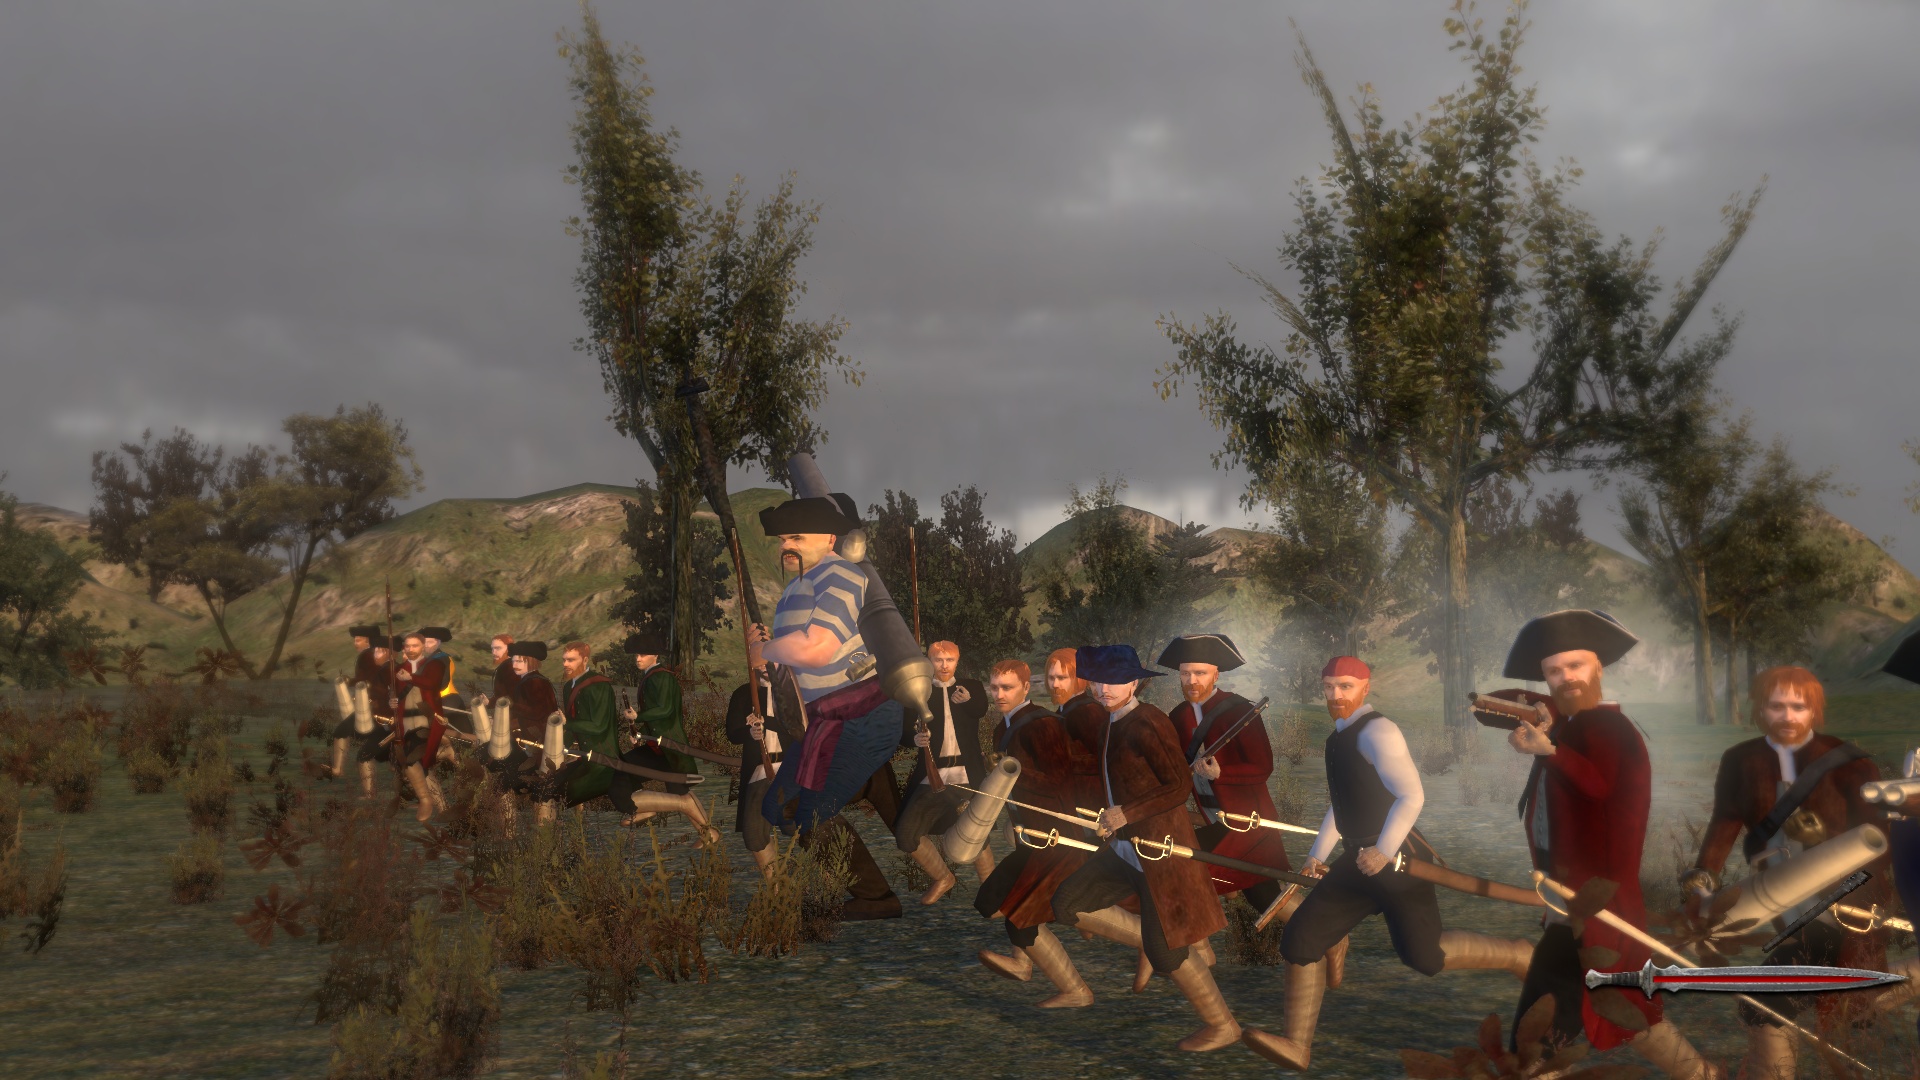 Warband warsword conquest. Warband Warsword. Mount and Blade Warband Warsword Conquest. Mount & Blade: Warsword Conquest расы. Warsword Conquest-1.2.